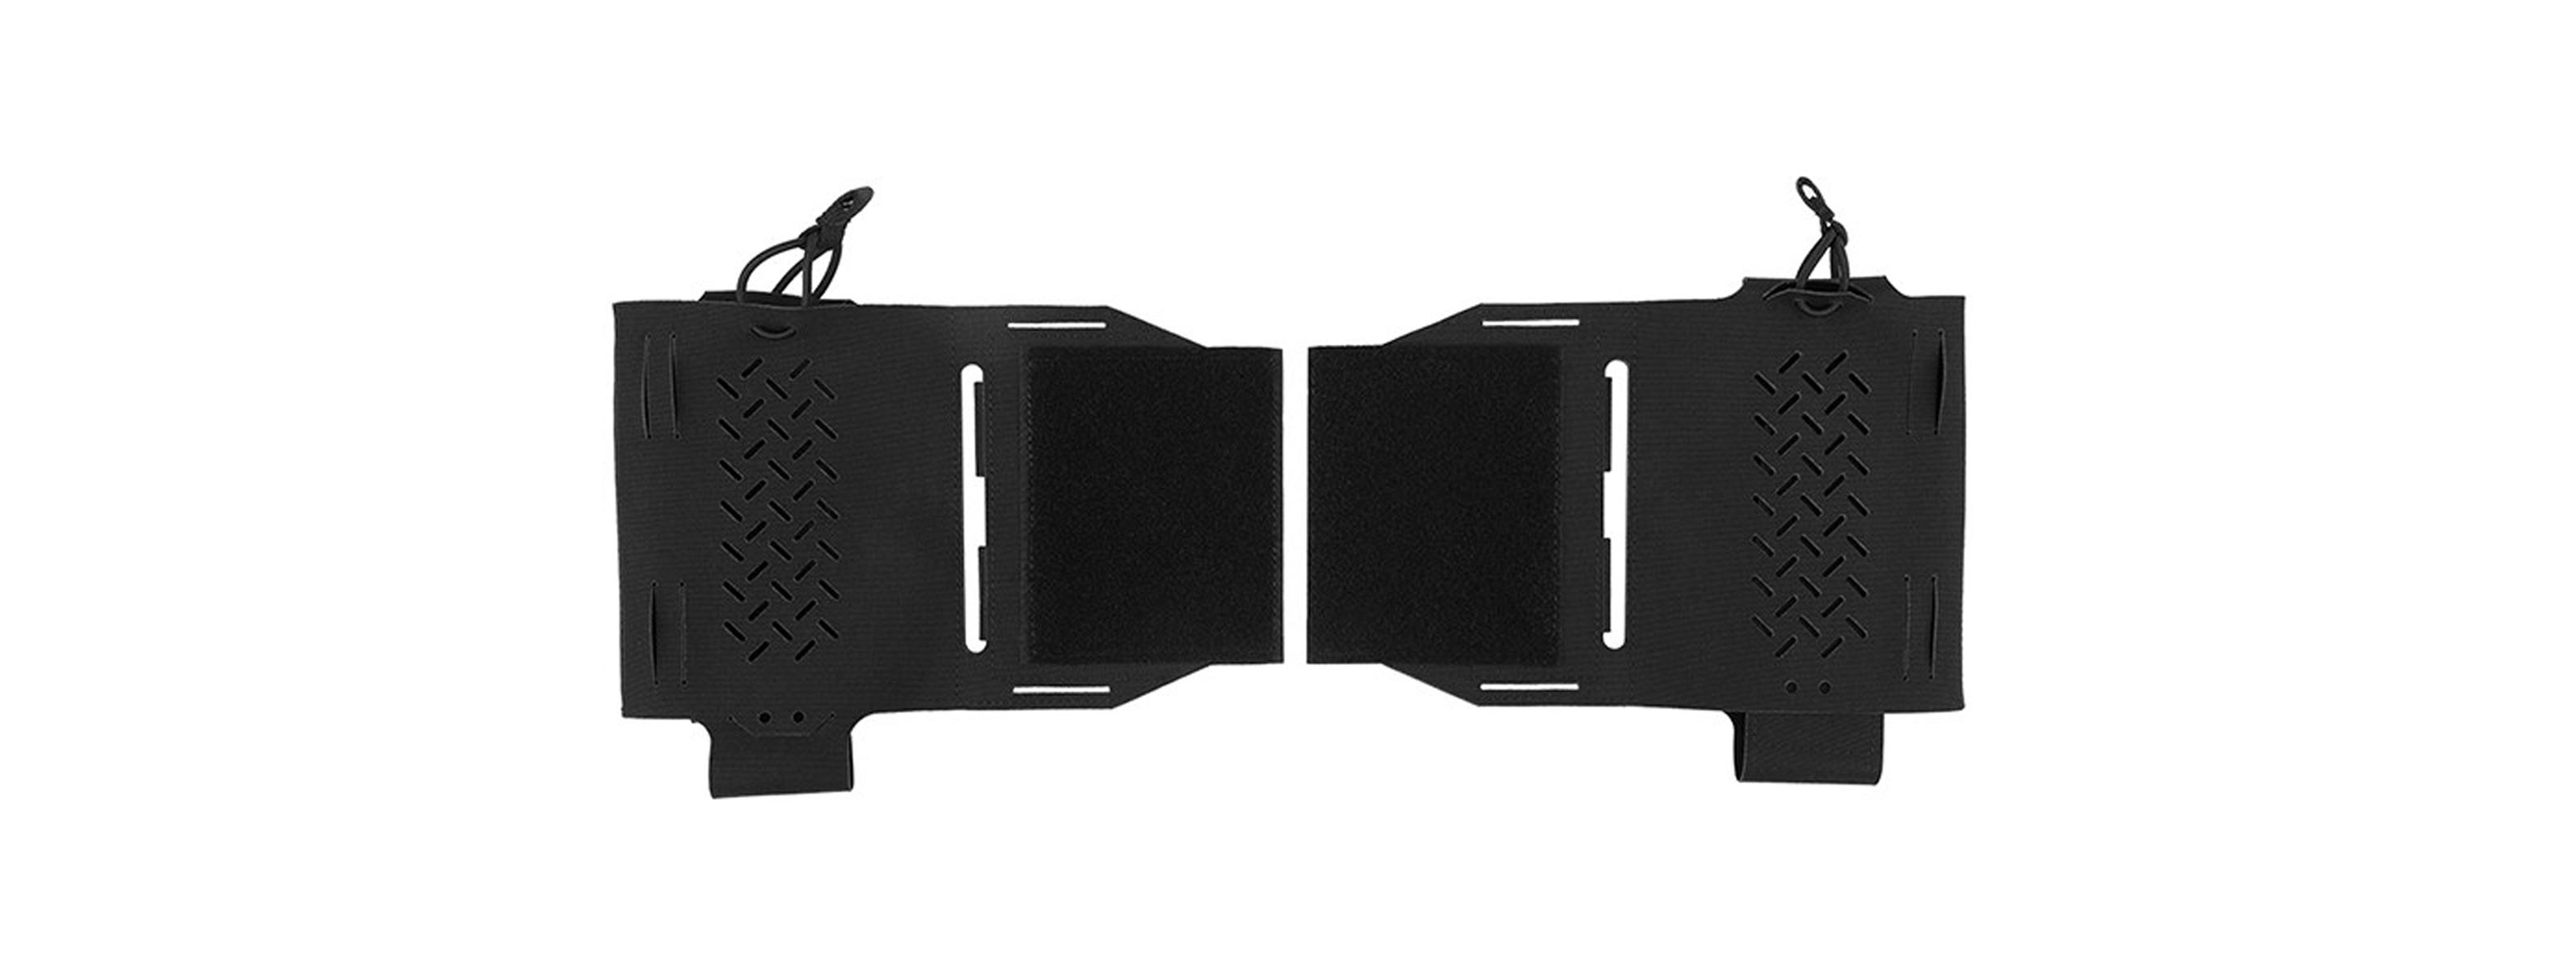 MK2 Expander Wing Pouches For Tactical Vests - (Black)